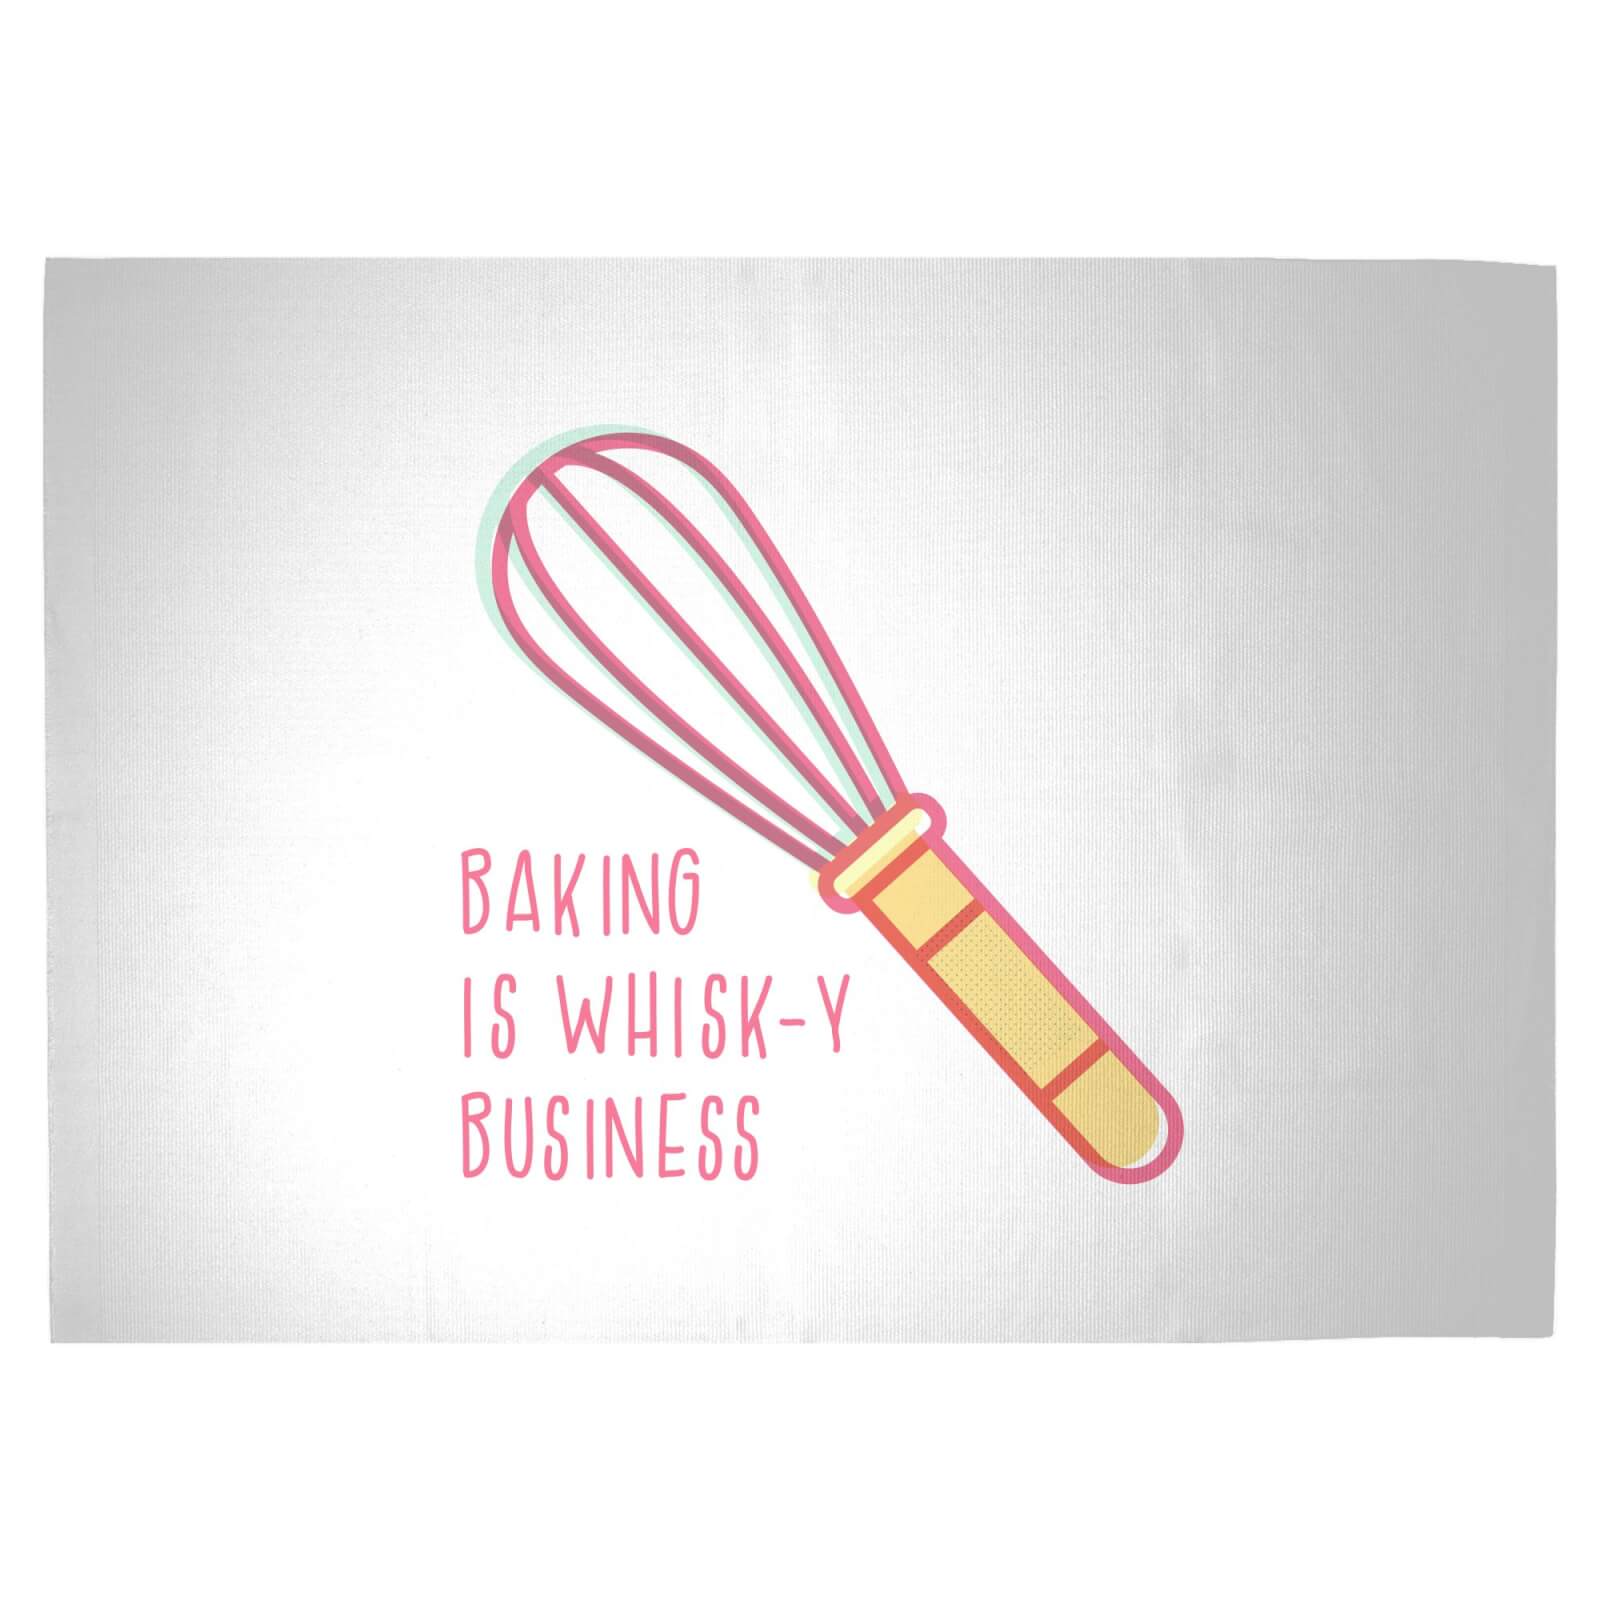 Baking Is Whisk-y Business Woven Rug - Large